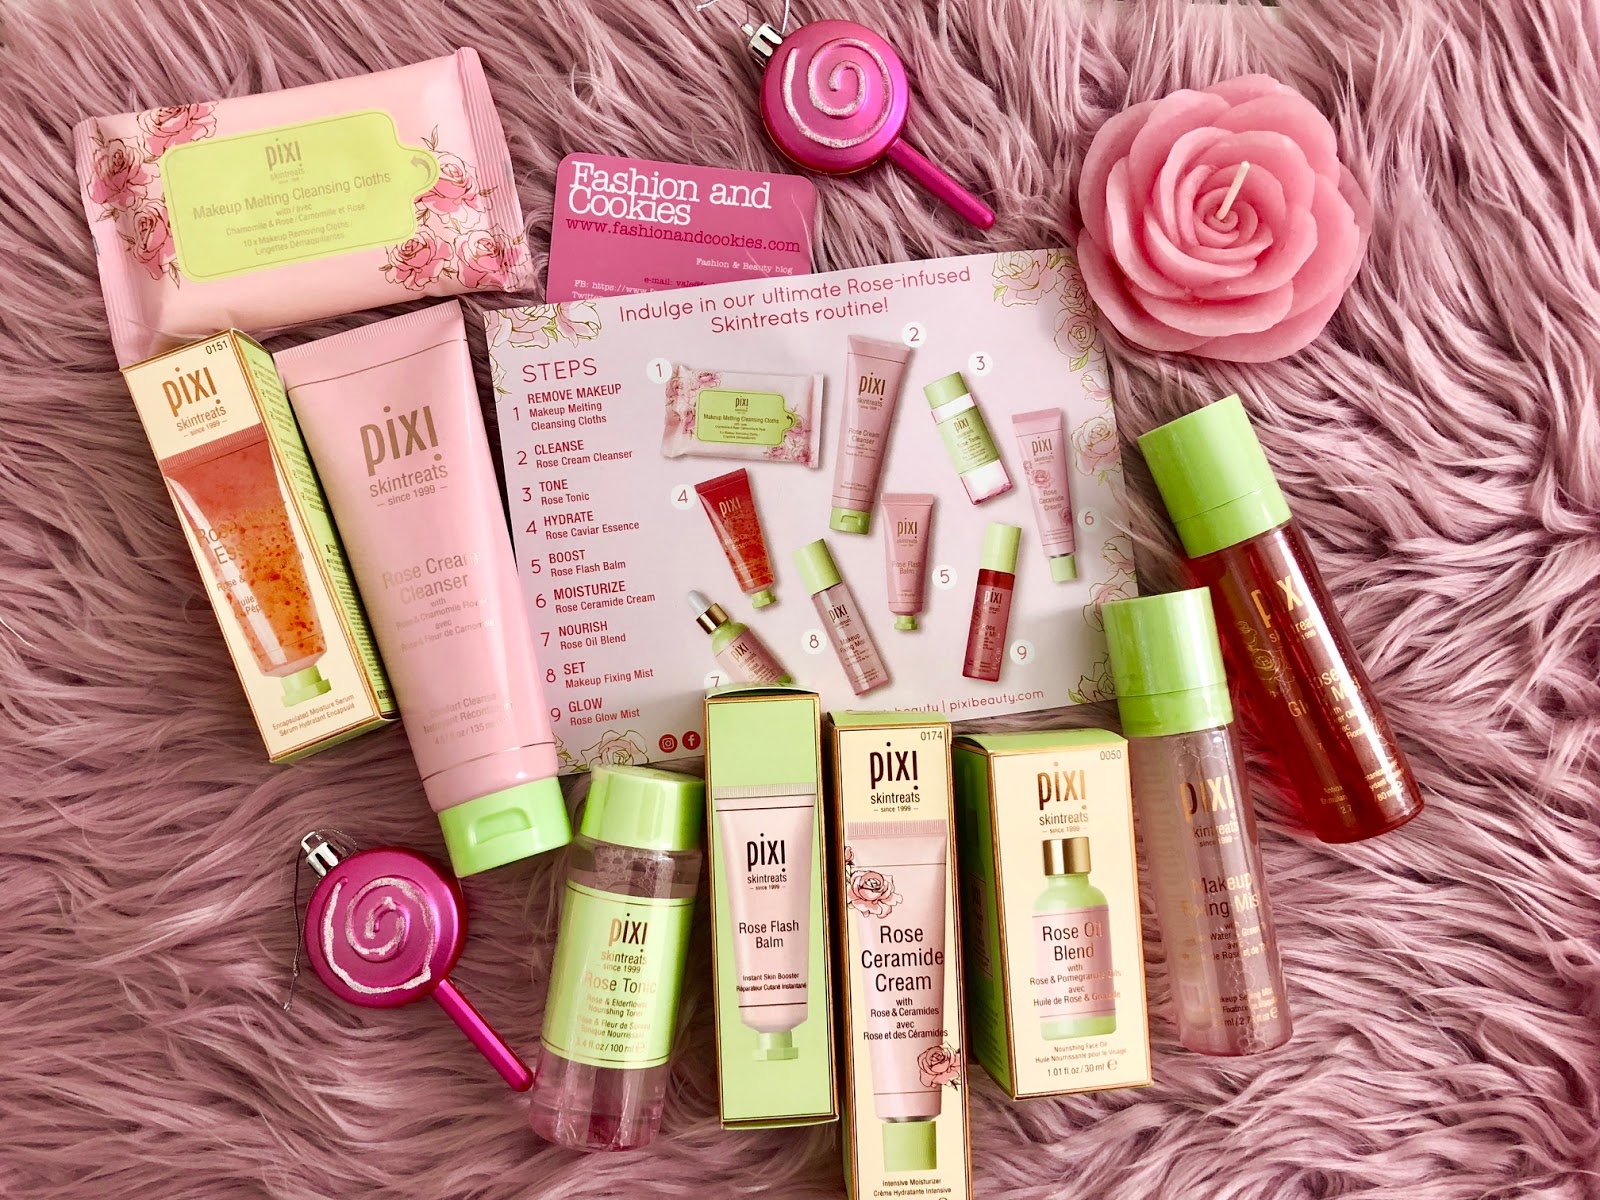 Pixi Beauty Ultra Luxe Rose-Infused Skintreats Set review on Fashion and Cookies beauty blog